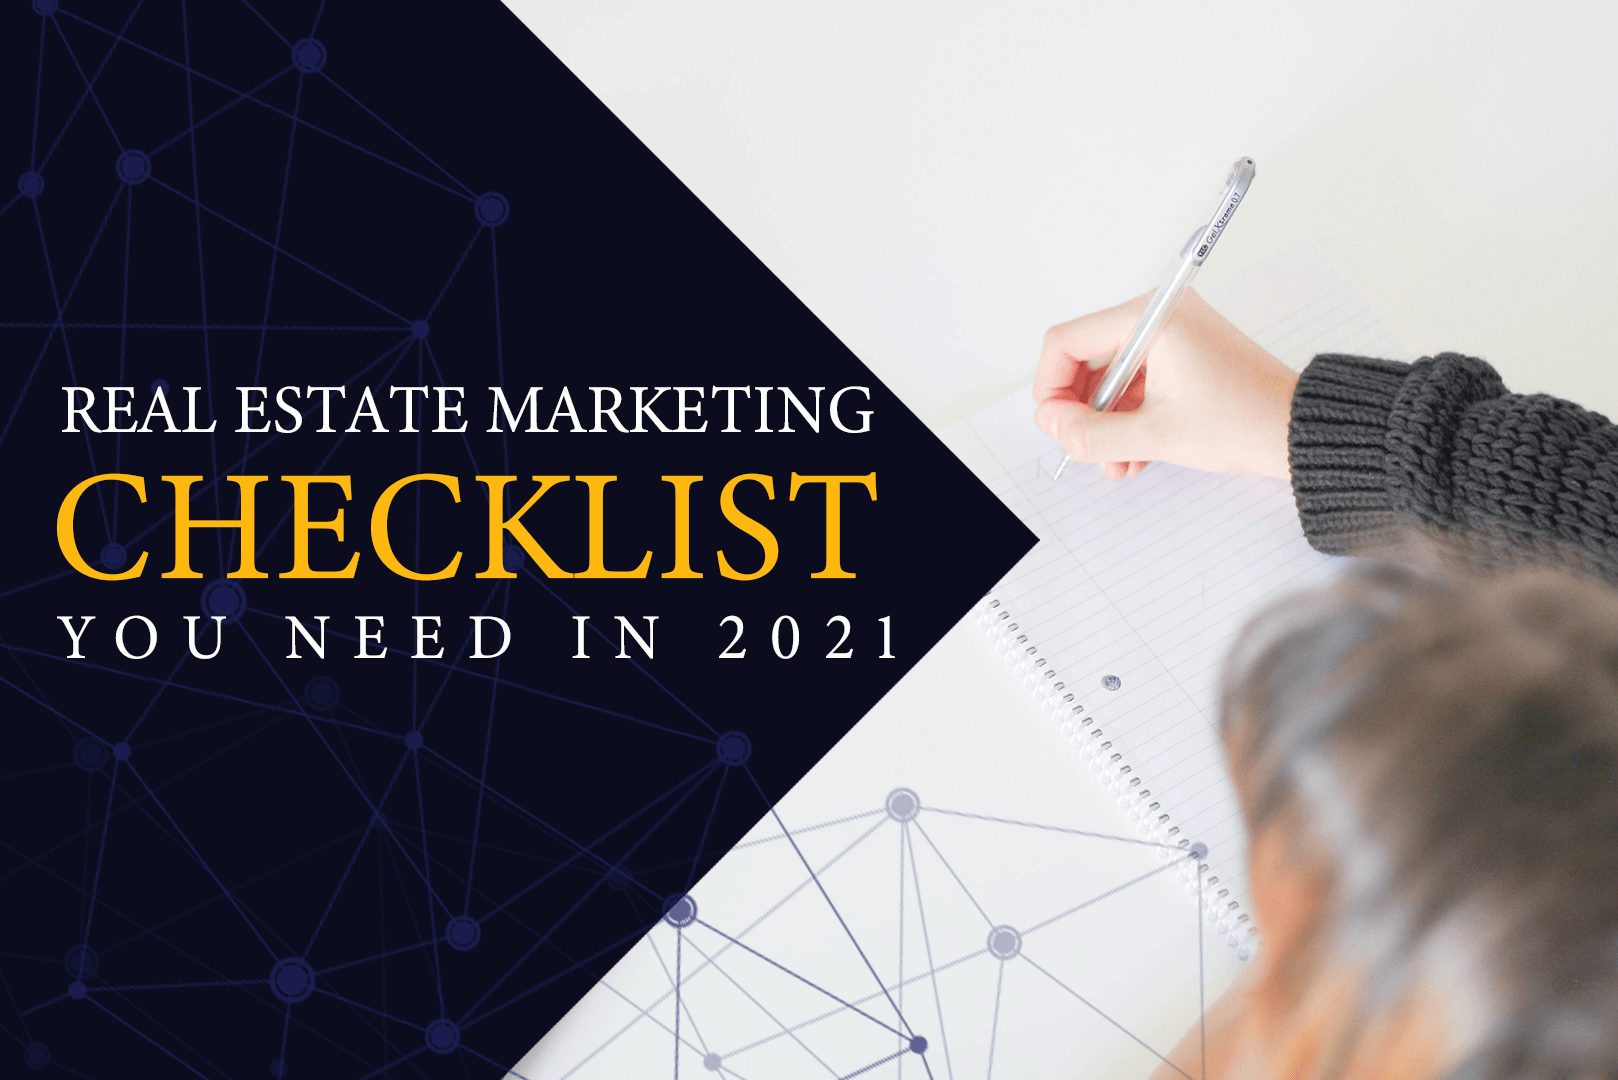 Real Estate Marketing Checklist You Need in 2021